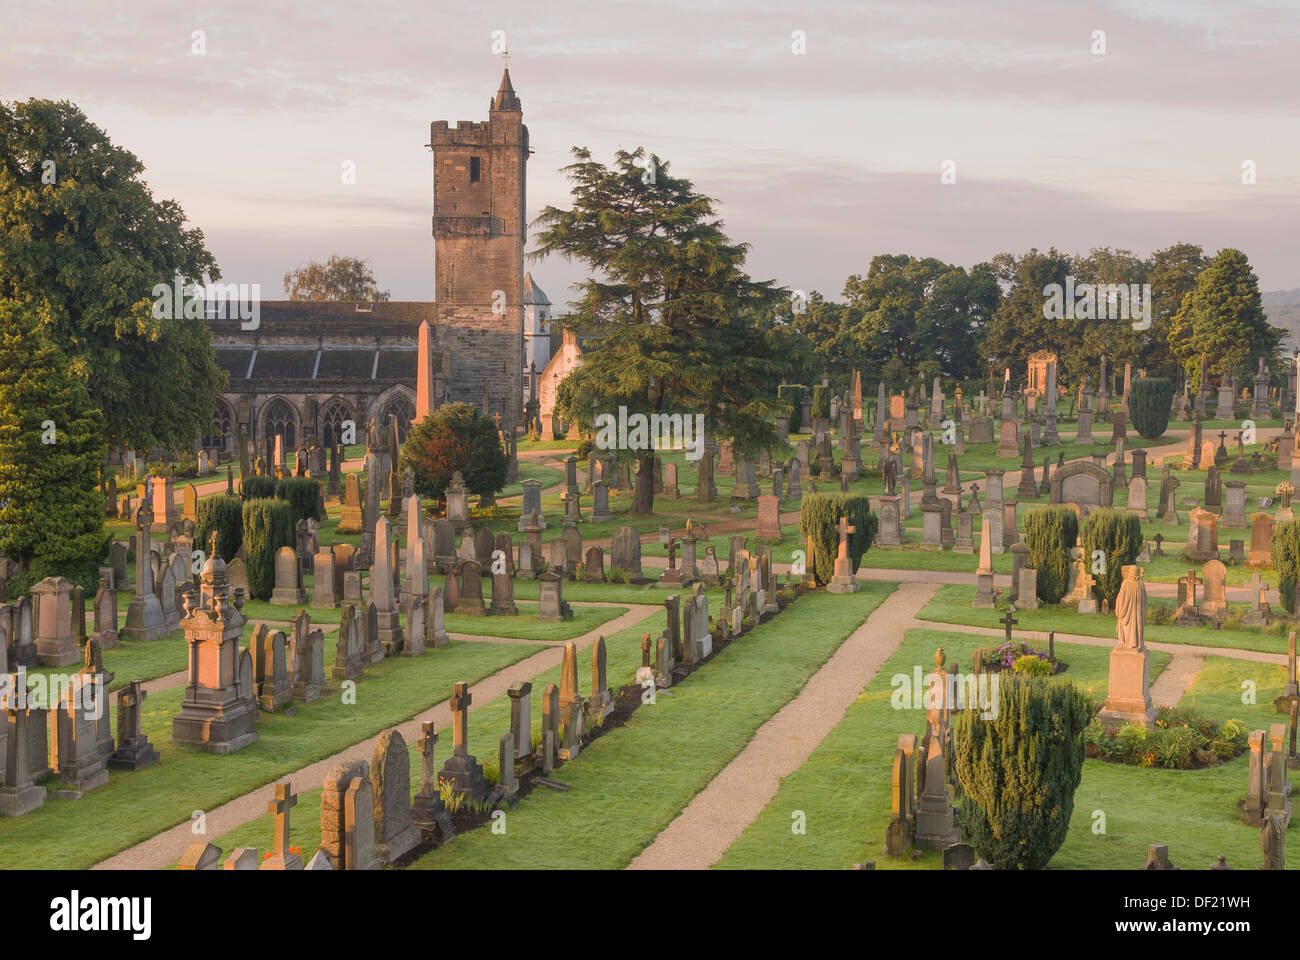 The Church of the Holy Rude Stirling Scotland. Stock Photo